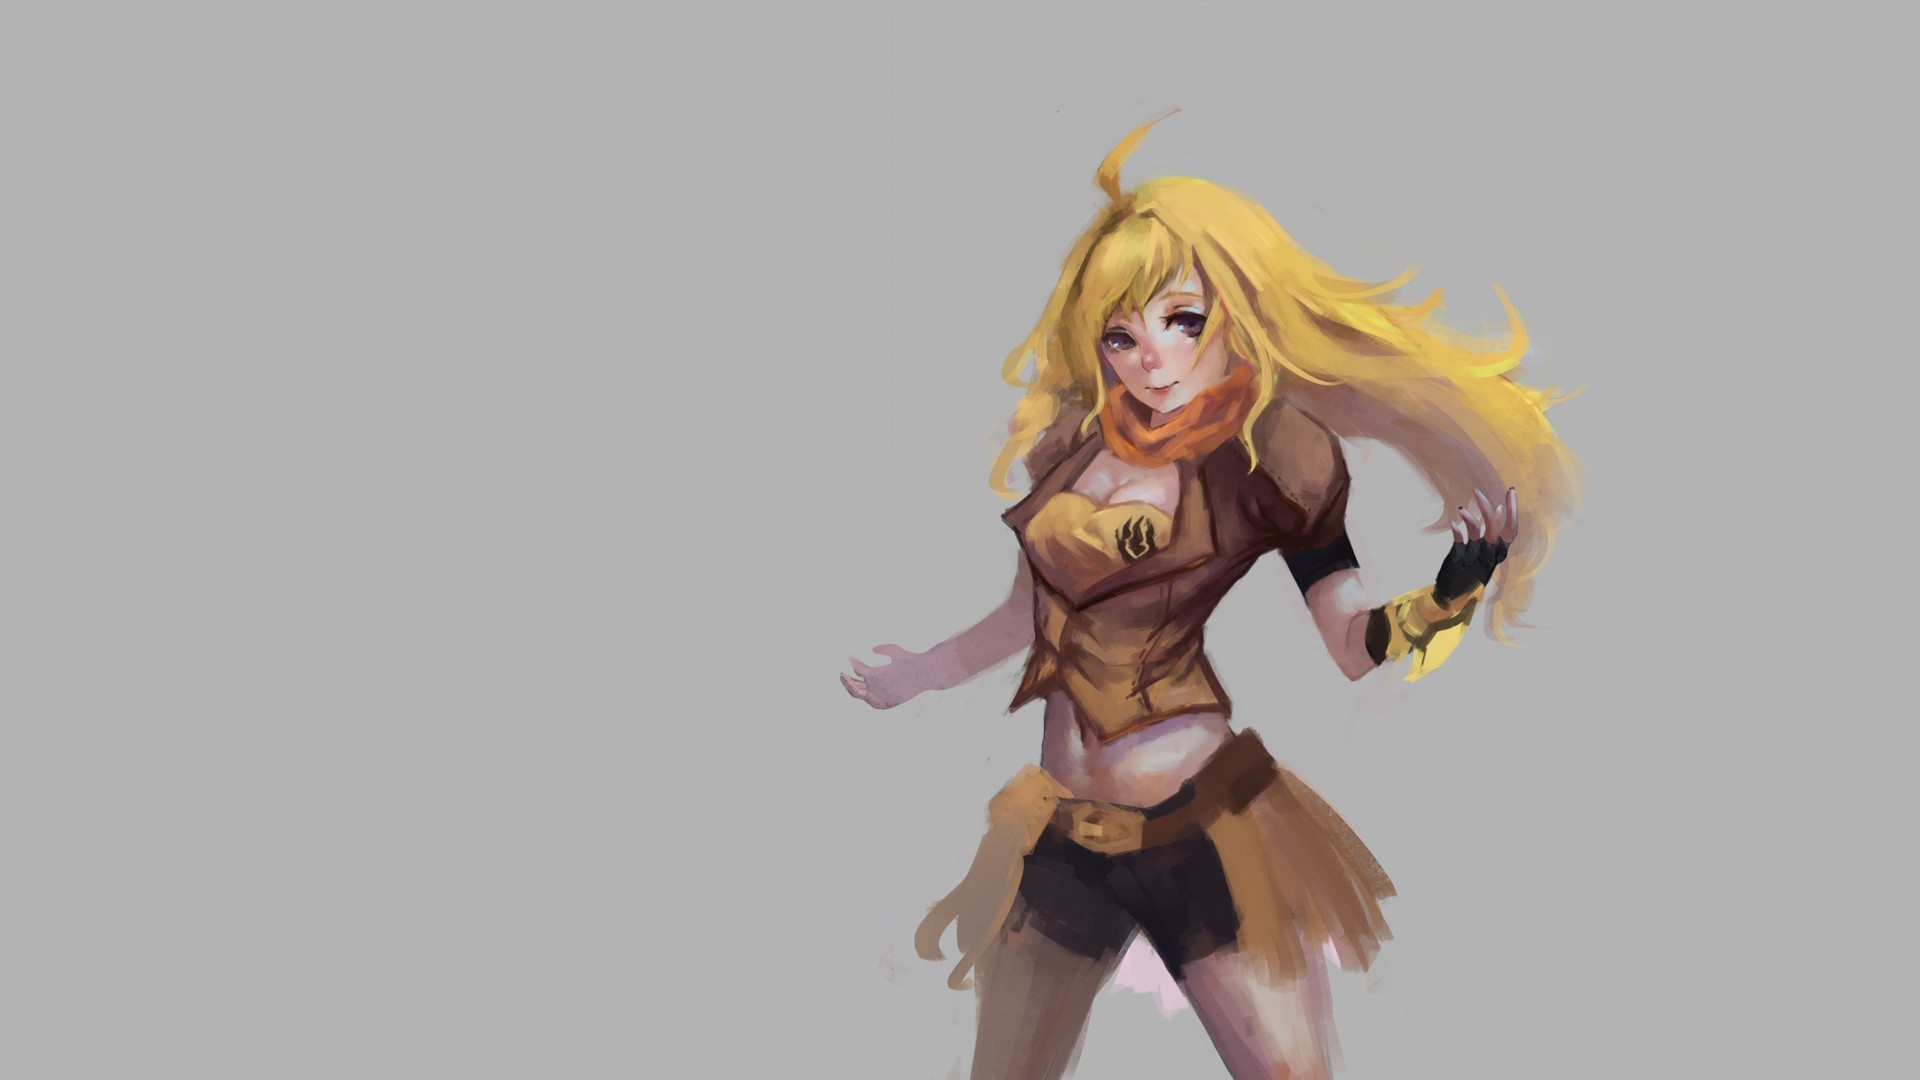 Rwby Yang Wallpaper ·① Download Free Awesome Full Hd Backgrounds For